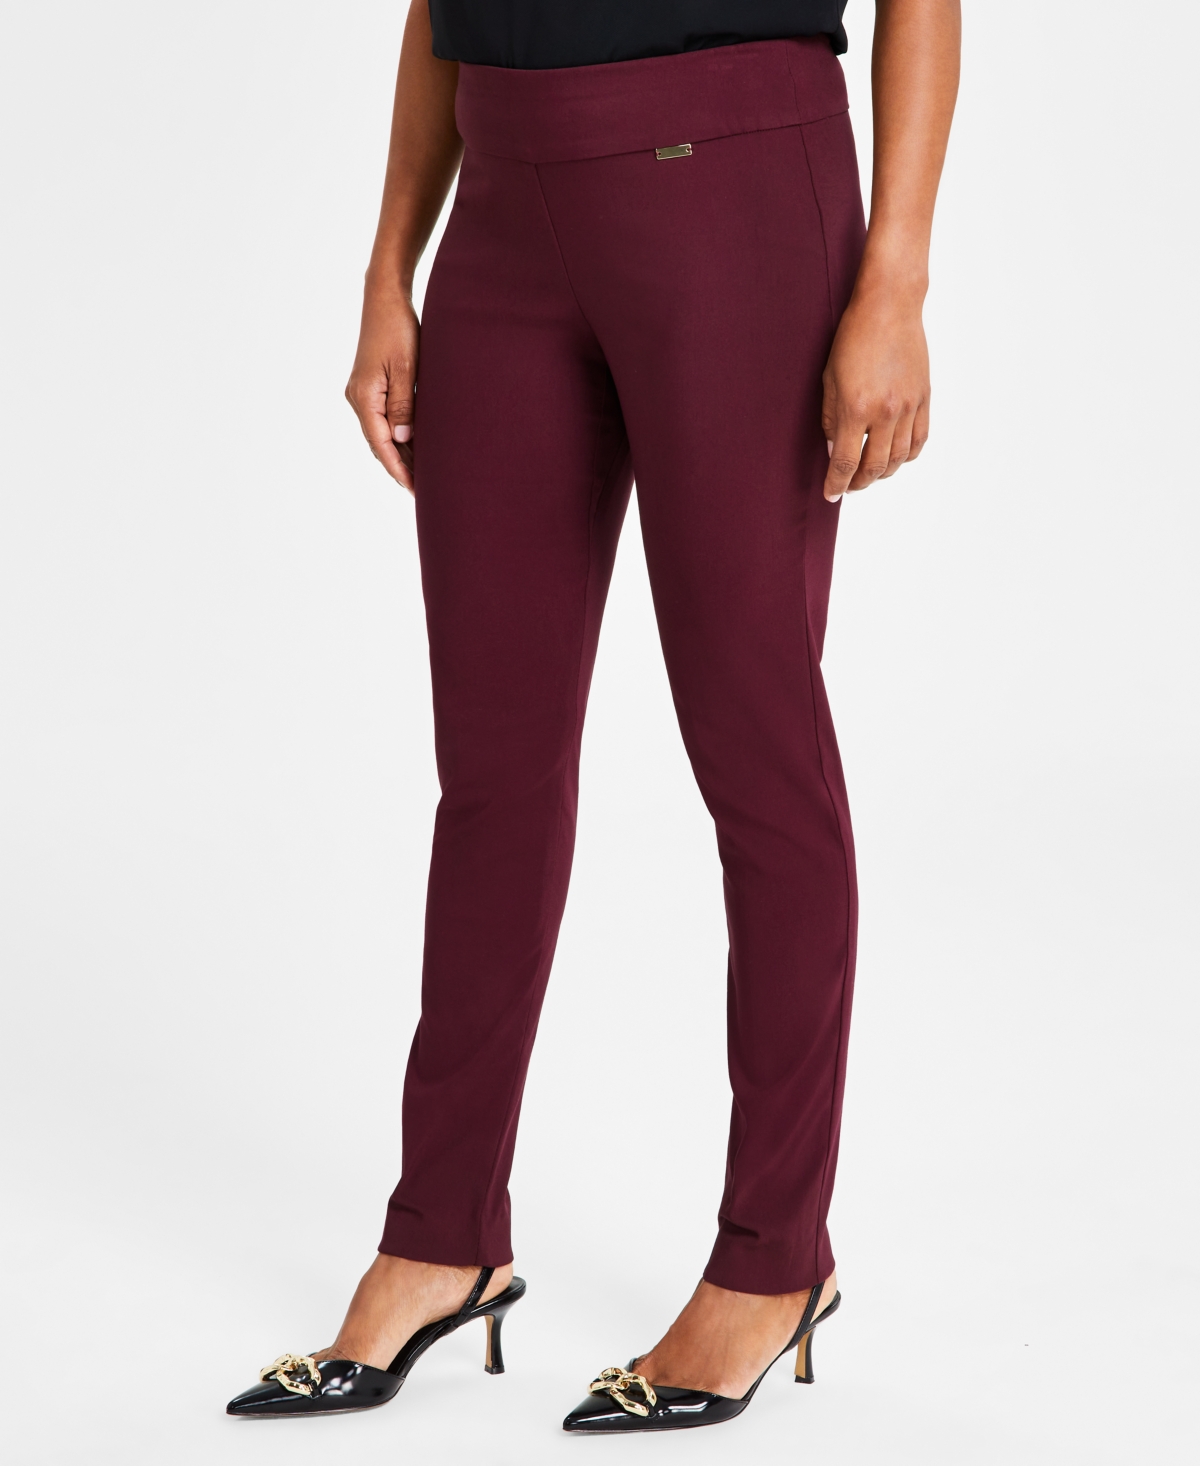 INC INTERNATIONAL CONCEPTS WOMEN'S TUMMY-CONTROL MID-RISE SKINNY PANTS, REGULAR, LONG & SHORT LENGTHS, CREATED FOR MACY'S